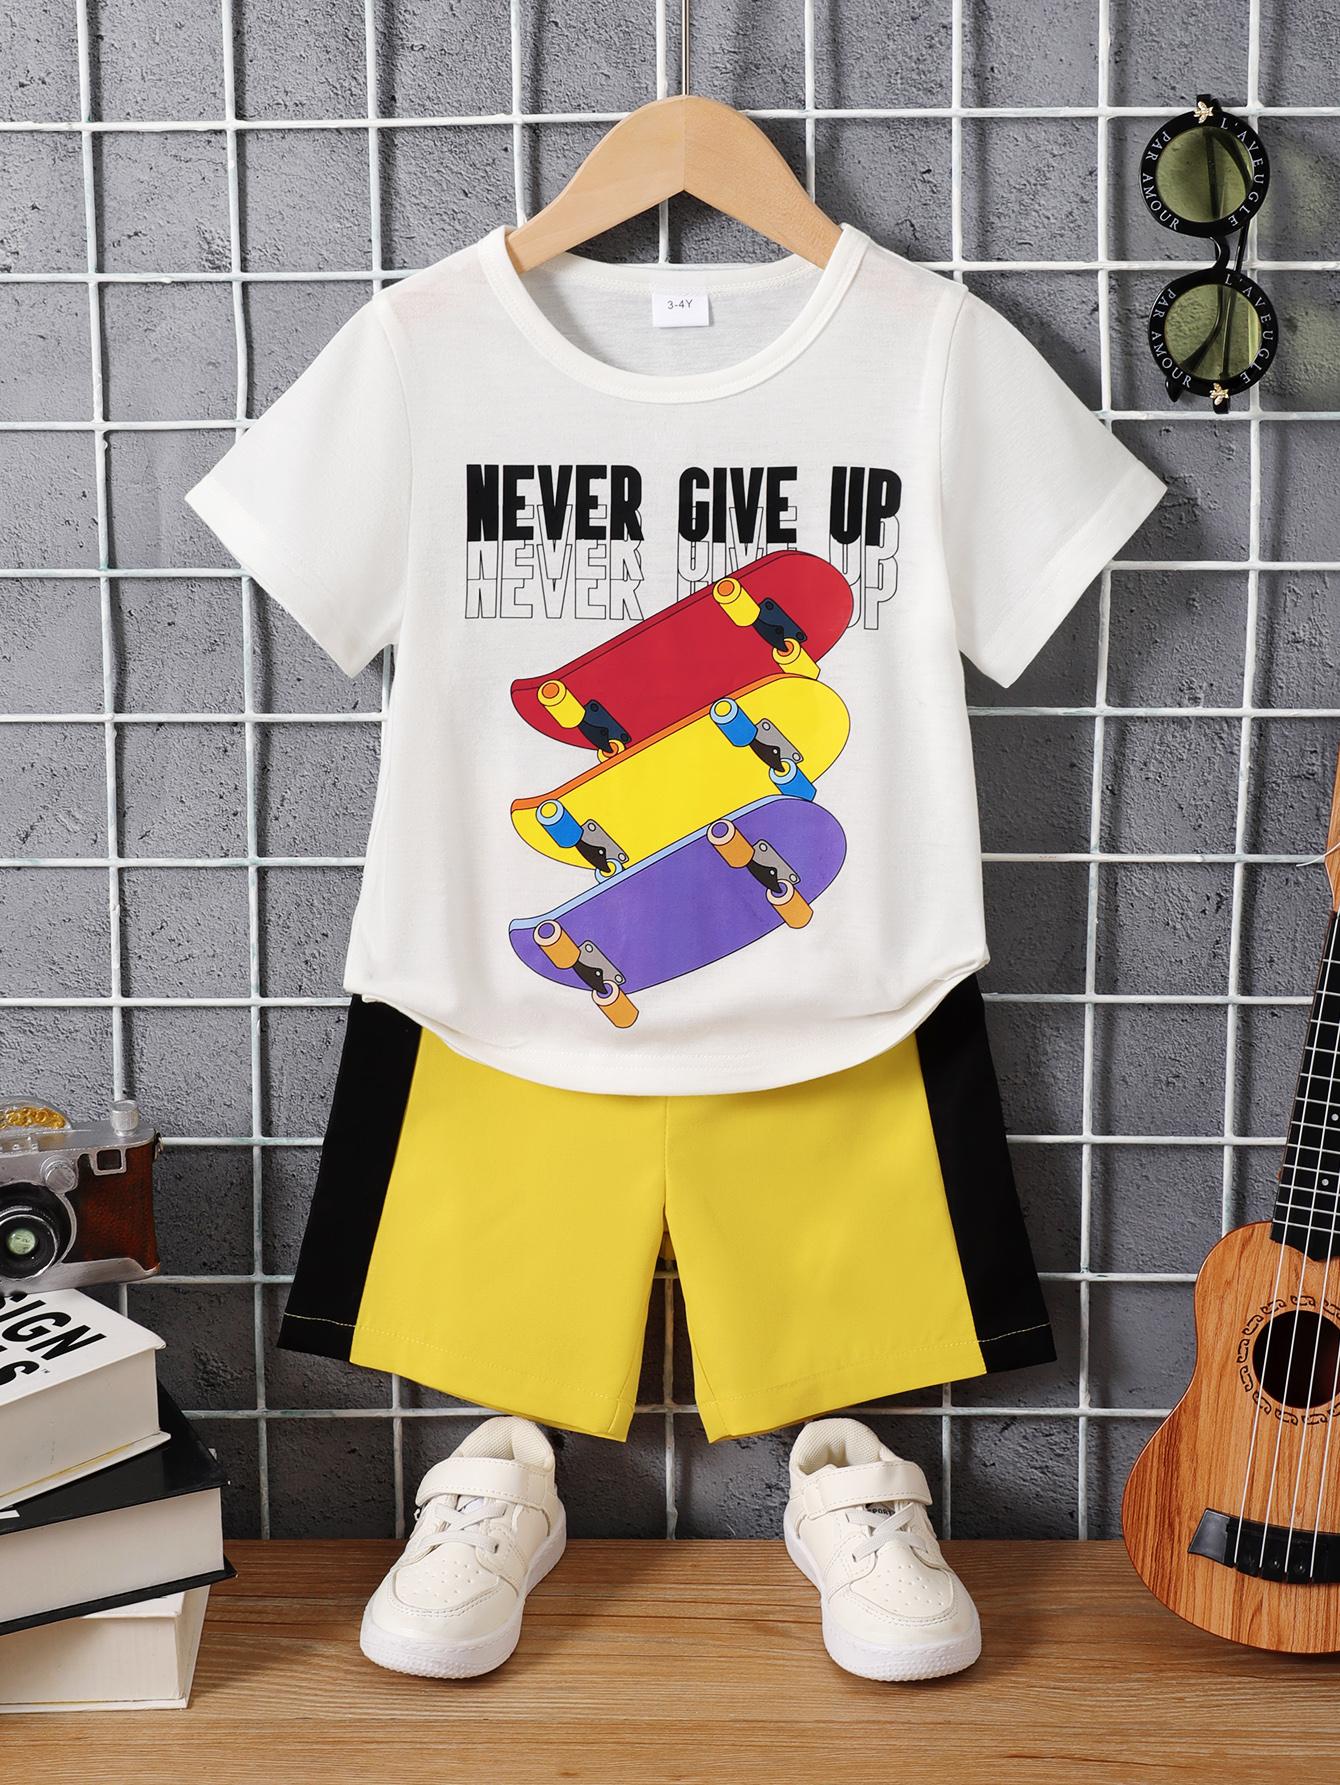 1-8Y Baby Boys Outfits Skateboard Print Letter Print Summer Tops Elastic Shorts 2Pcs Clothes Set White Catpapa 462303018